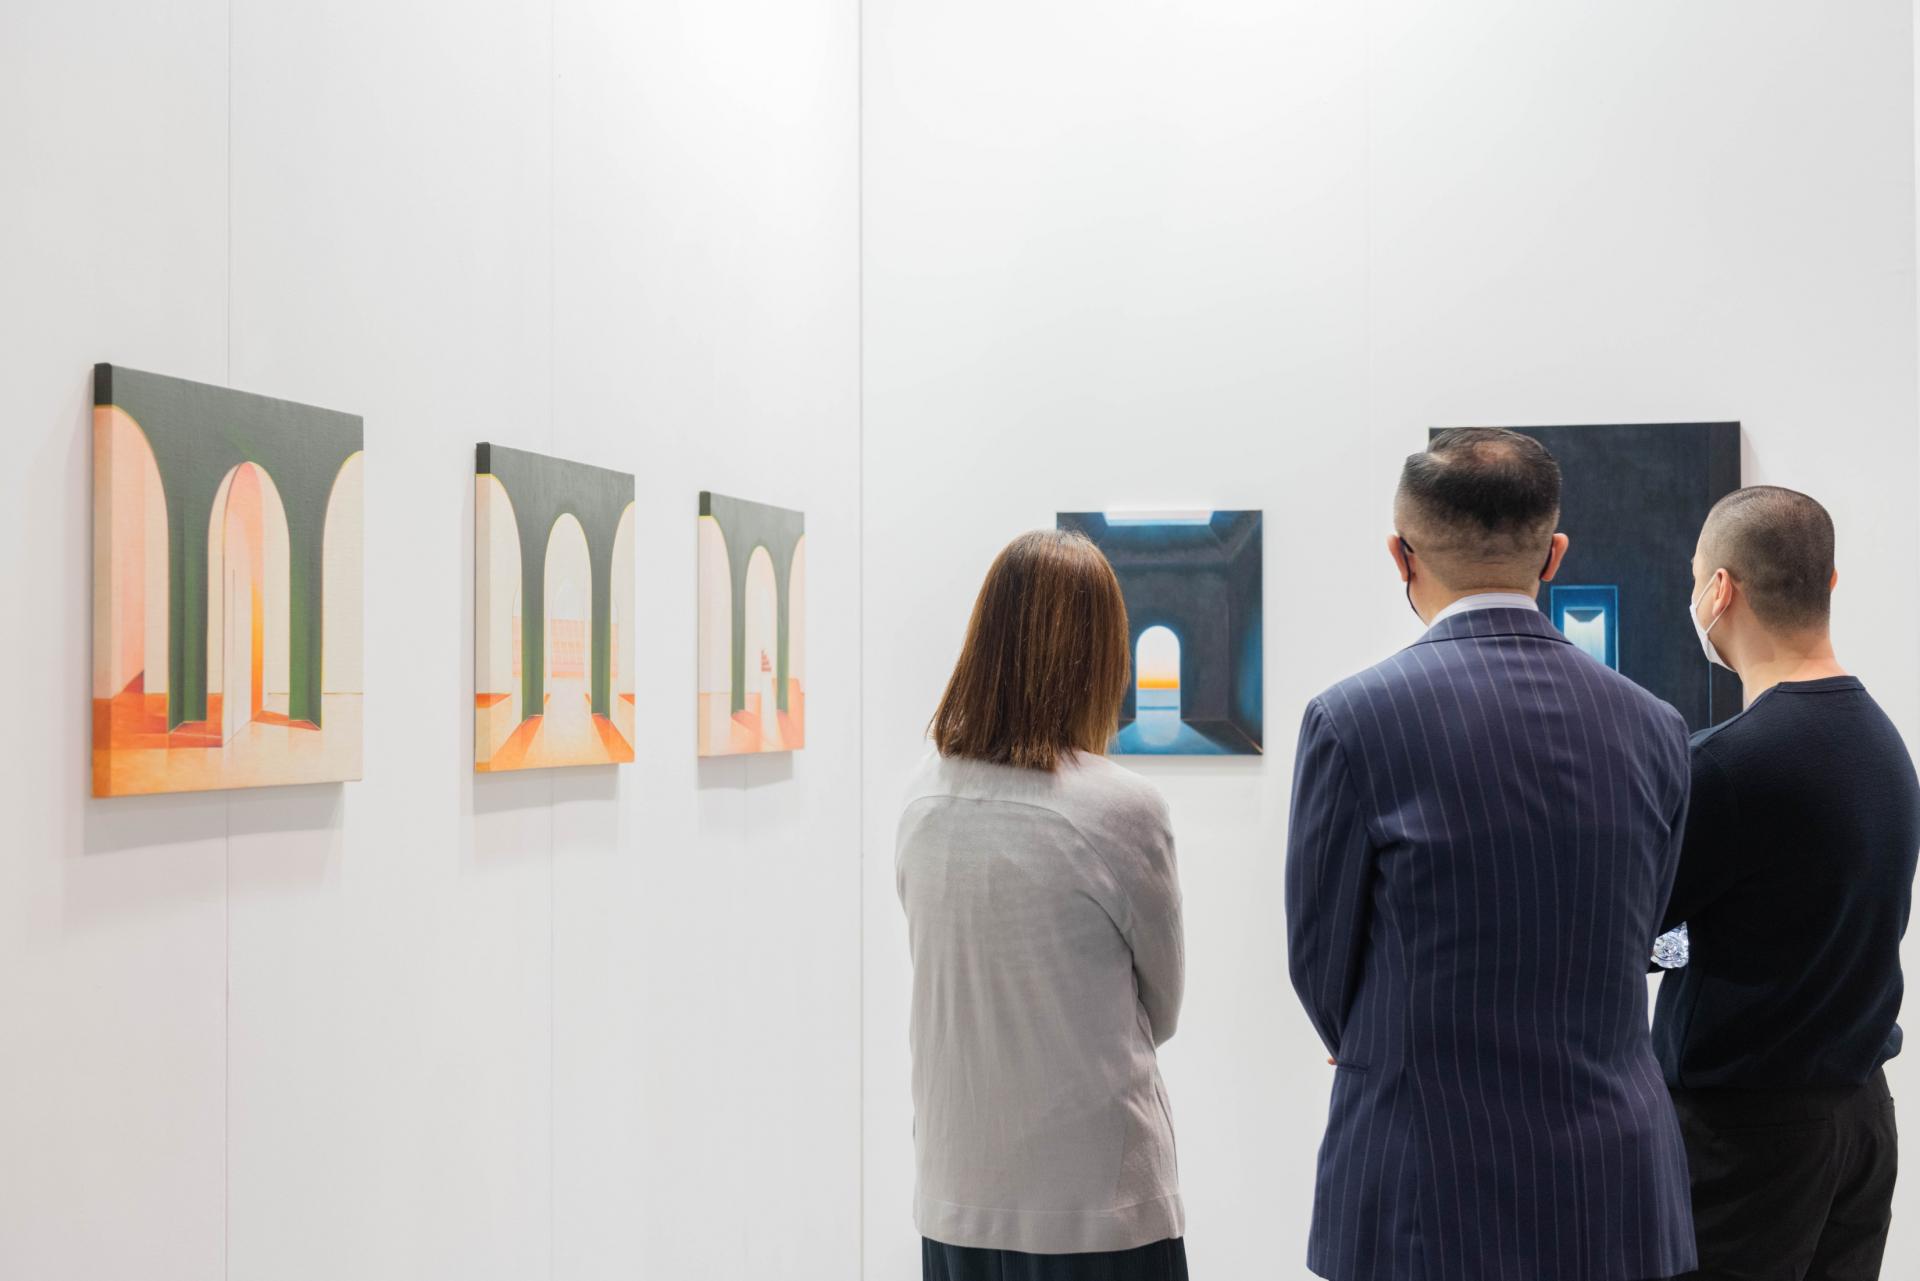 Art Central returns to Hong Kong this March 2023